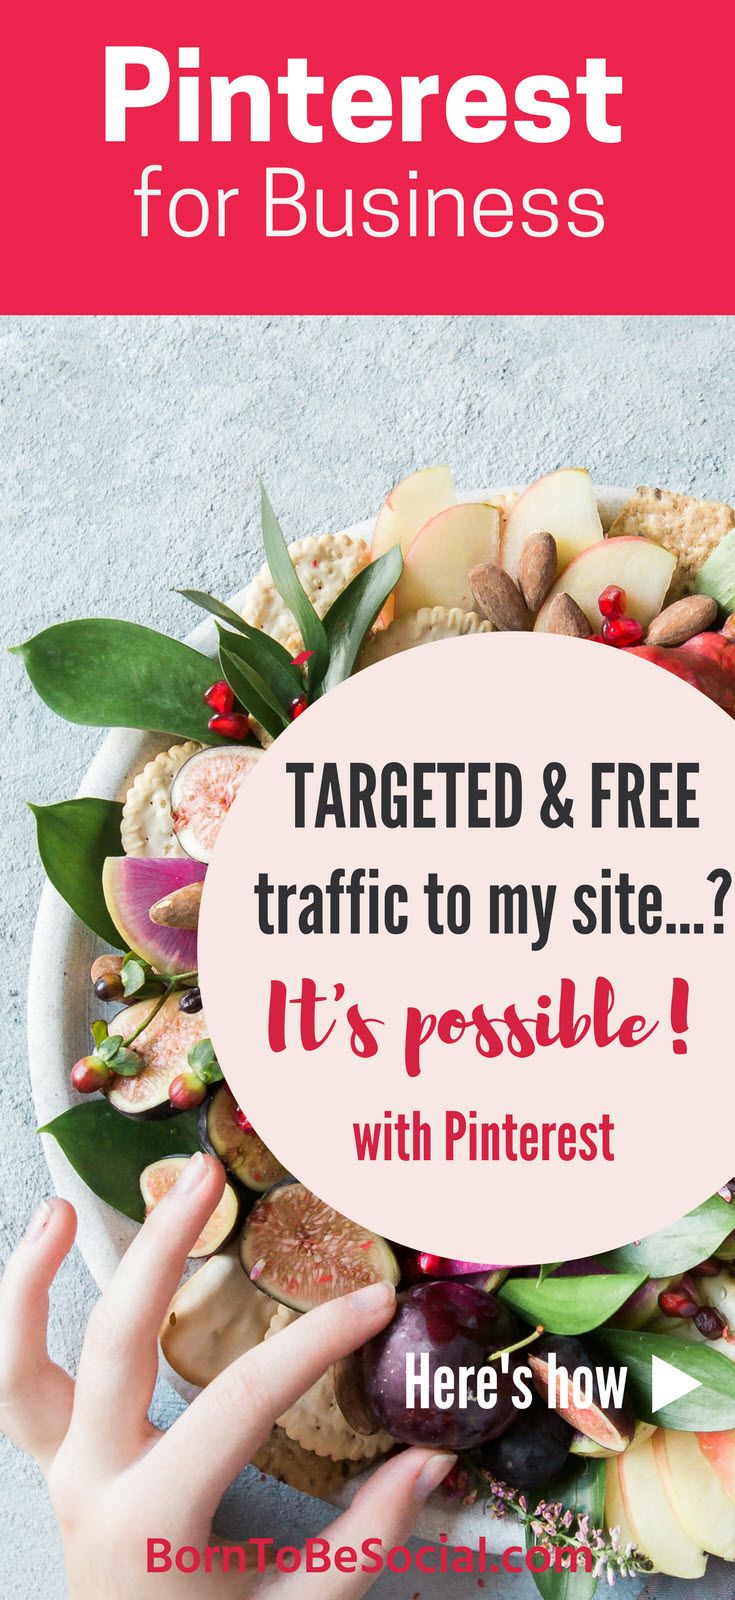 Learn how to build a PERFECT Pinterest page that attracts YOUR DREAM CLIENTS... be helpful | be visual | inspire! Three essential ingredients to steer a targeted audience in your direction. Get discovered on Pinterest by your perfect clients. Pinterest Strategy Tips for Business. | via @BornToBeSocial – Conversion Focused Pinterest Marketing